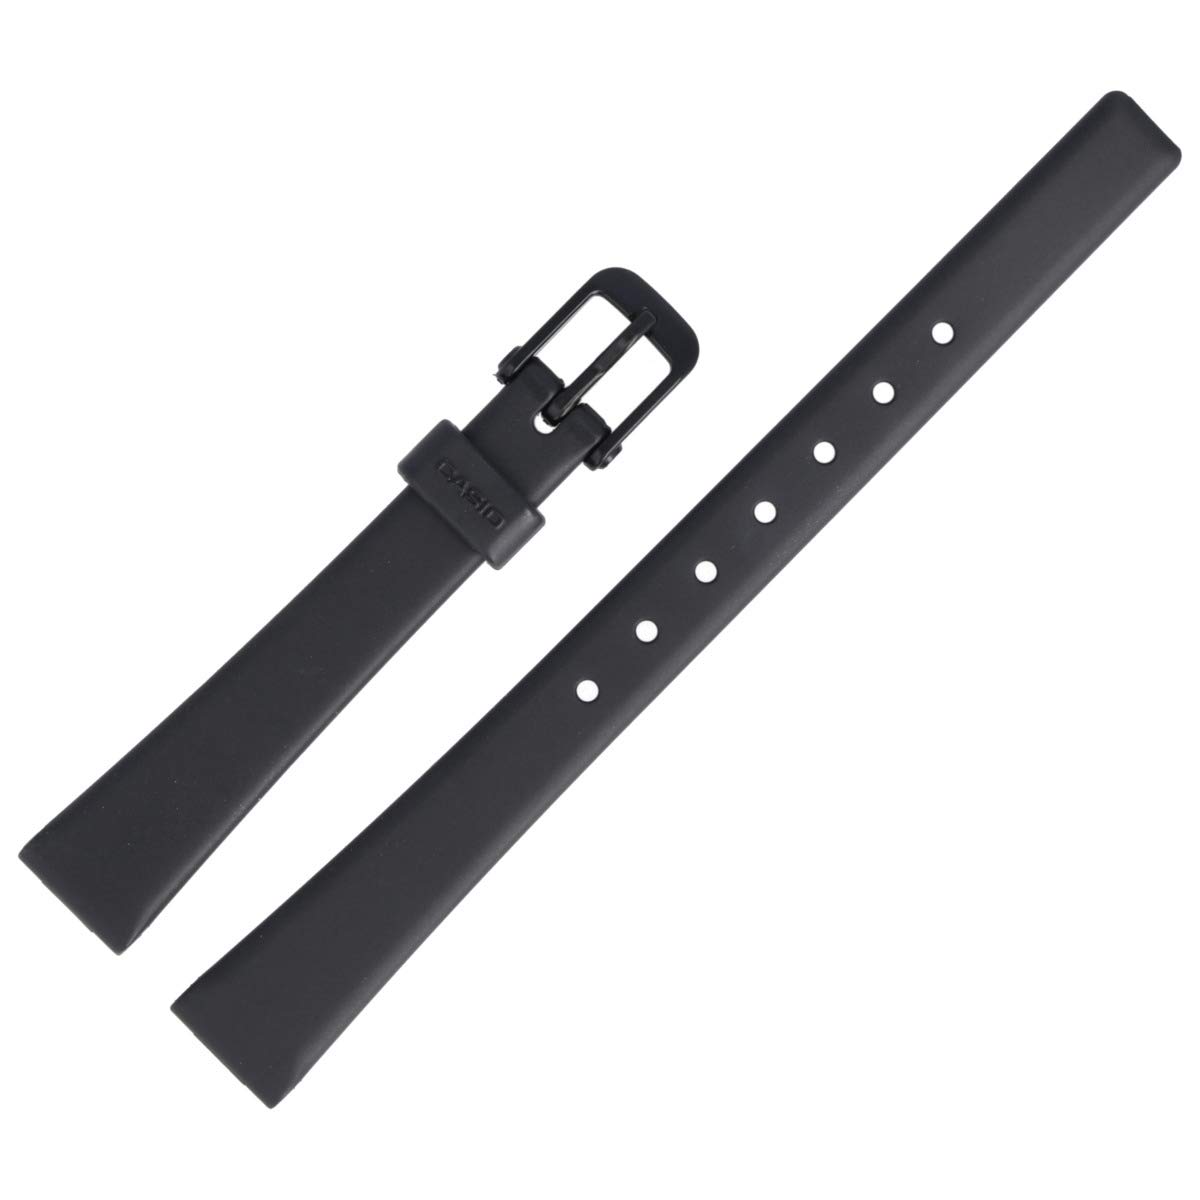 Genuine Casio Replacement Watch Strap/Bands for Casio Watch LQ-139 + Other Models